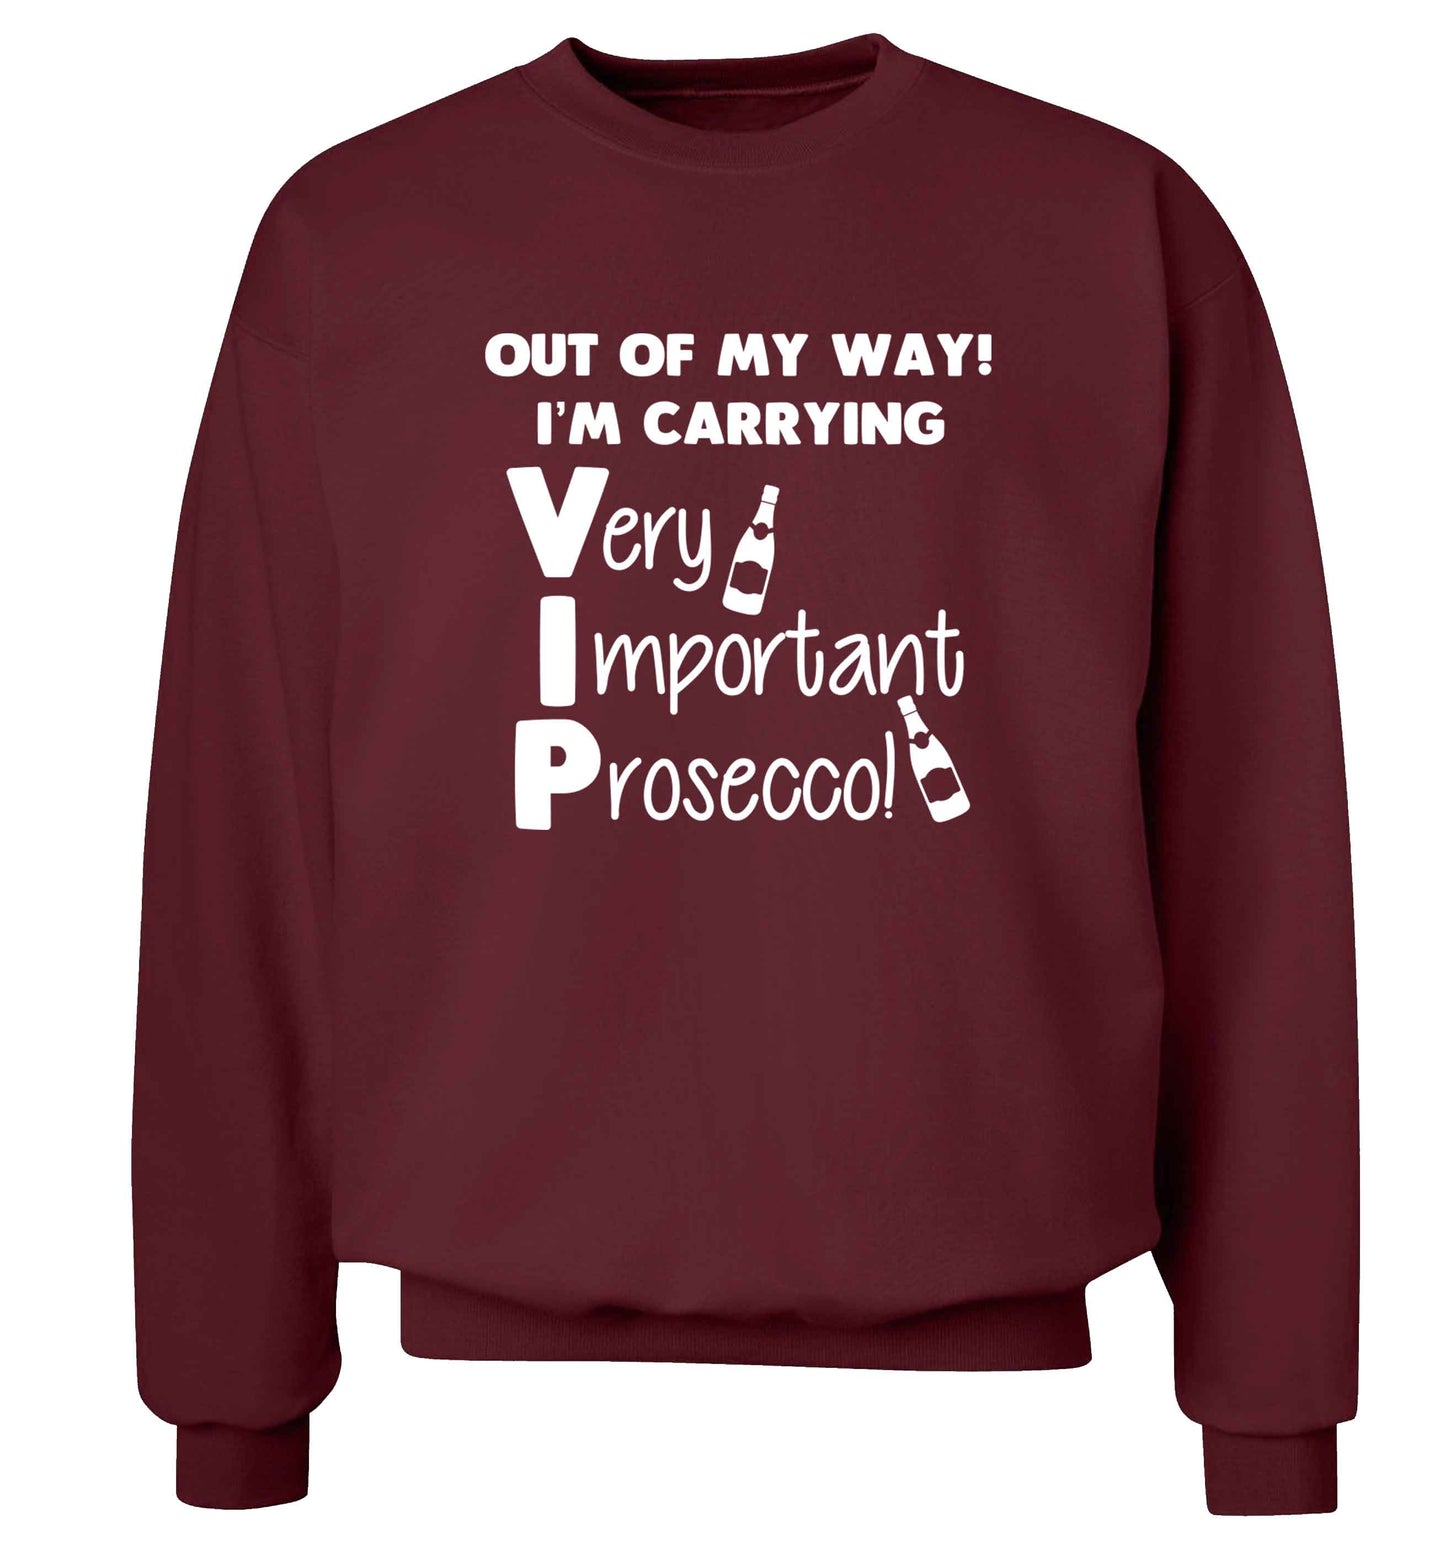 Out of my way I'm carrying very important prosecco! adult's unisex maroon sweater 2XL